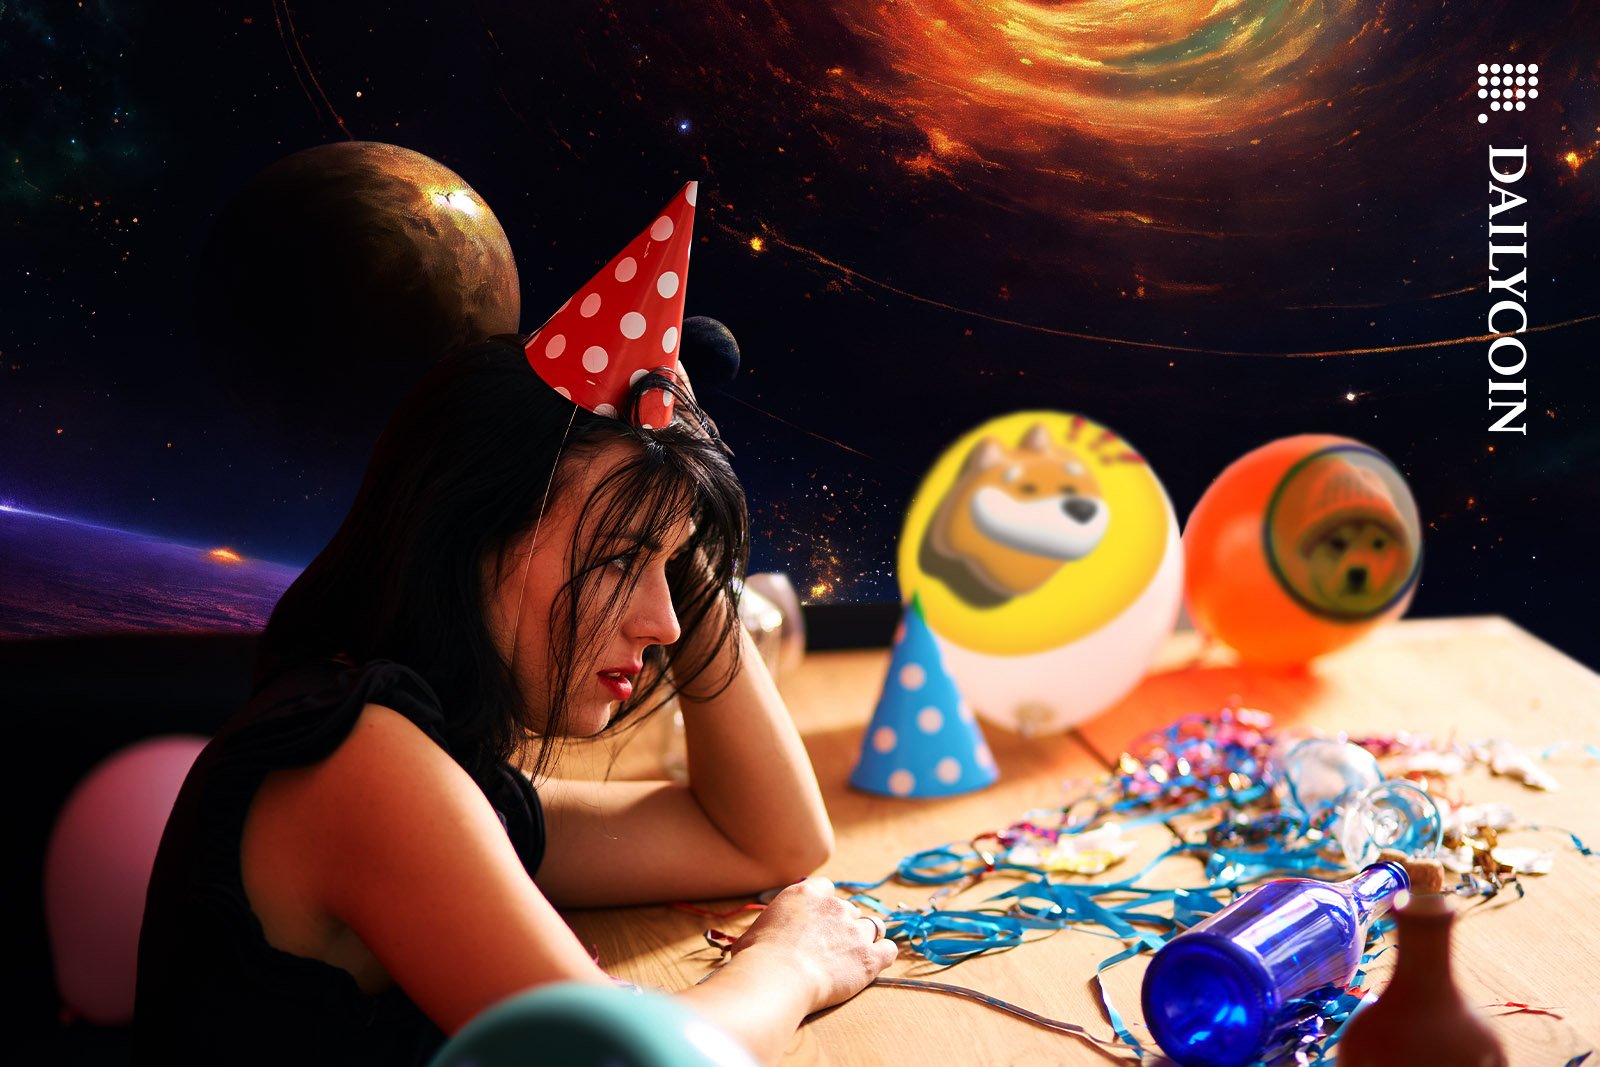 Woman wearing party hat sitting by a messy table after a party.